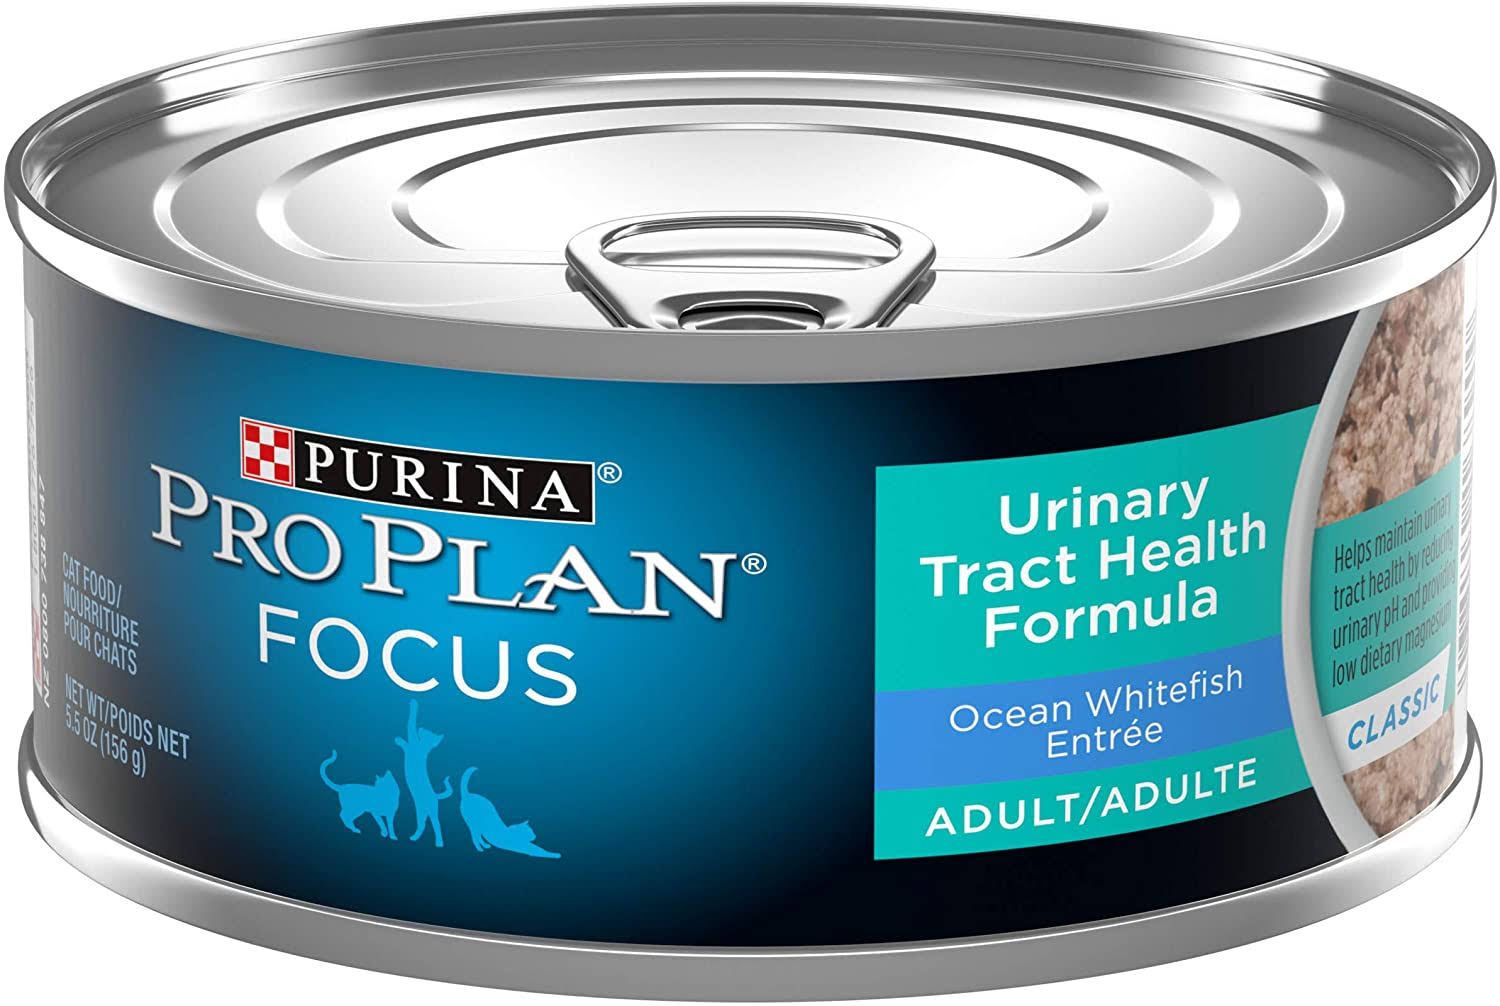 Purina Pro Plan Urinary Tract Health Pate Wet Cat Food, Focus Urinary Tract Health Formula Ocean Whitefish Entree - 5.5 oz